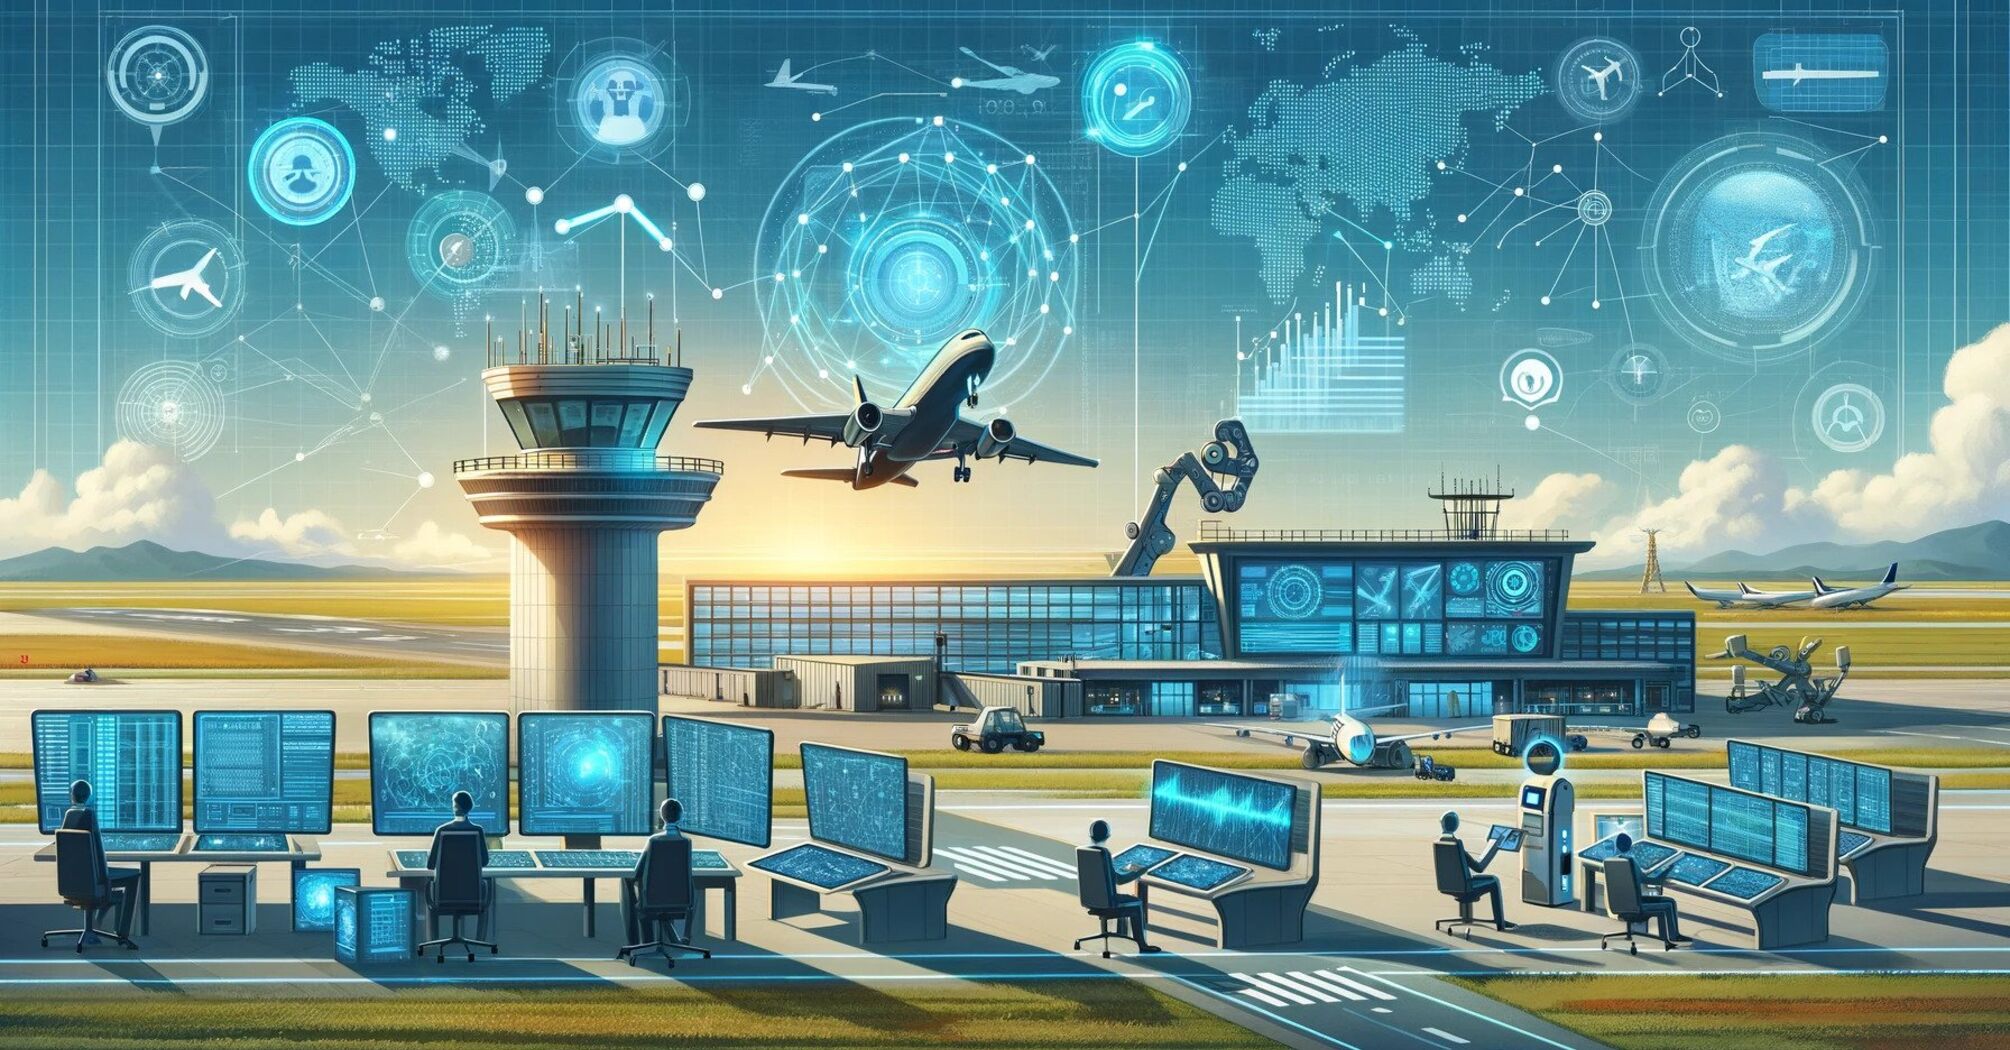 Control tower with screens and holographic data, airplane taking off, and robot, representing AI in aviation